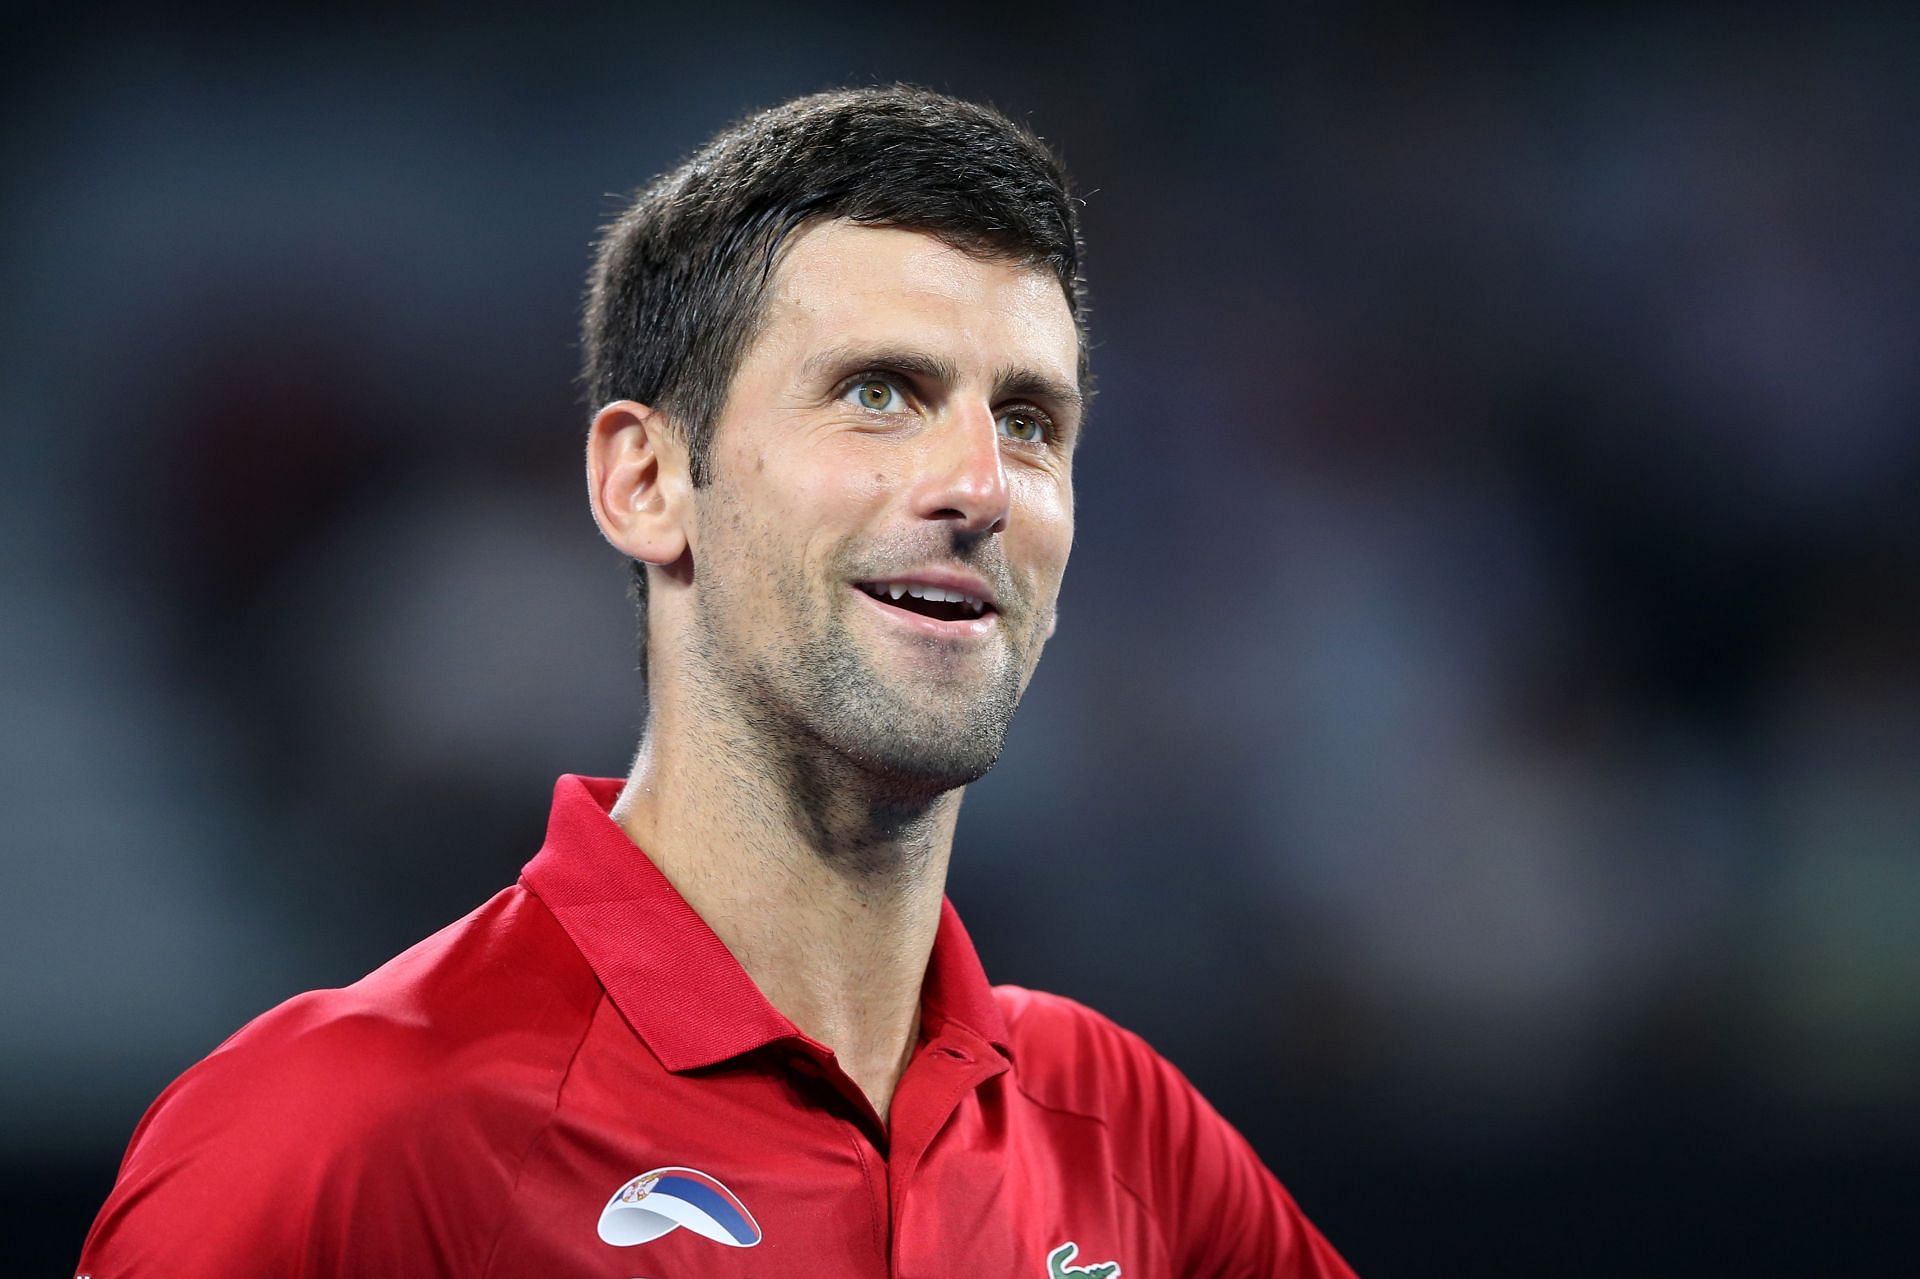 Father of child whose medical treatment was supported by Novak Djokovic reached out to the Serb